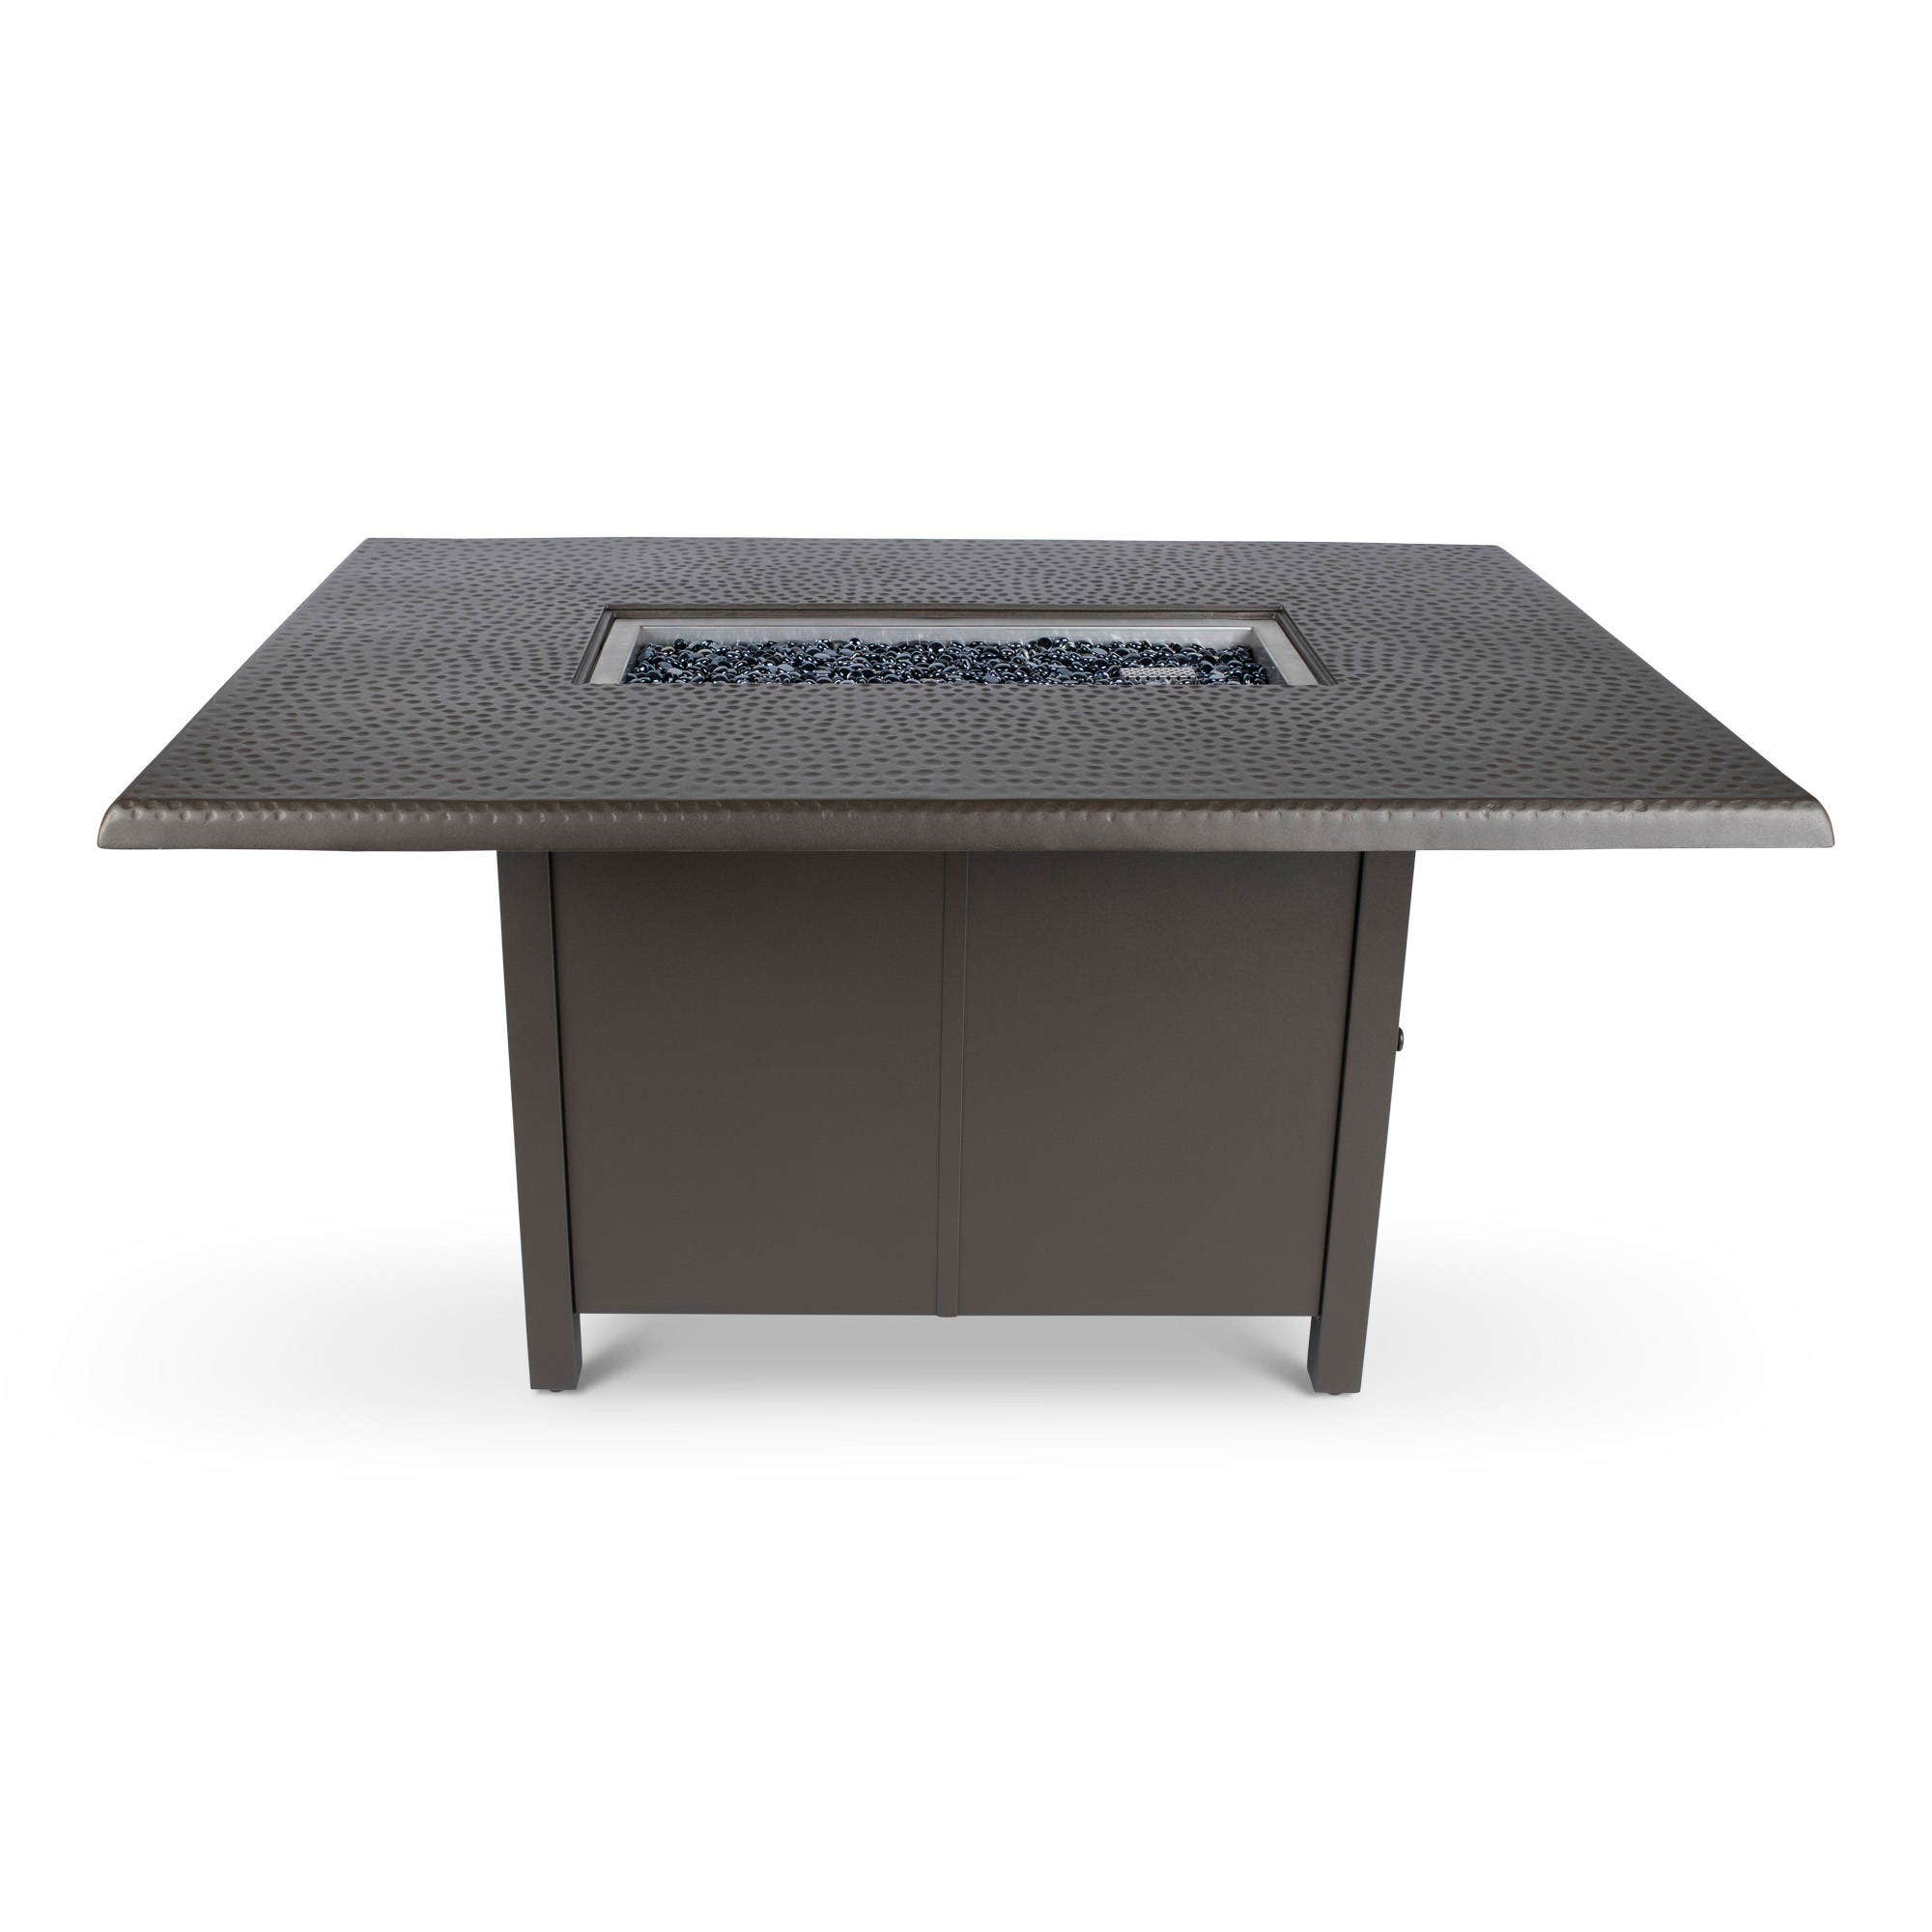 Woodard 42 inch x 60 inch Dining Fire Table with Hammered Top in Aztec Bronze Fireplaces 12037579